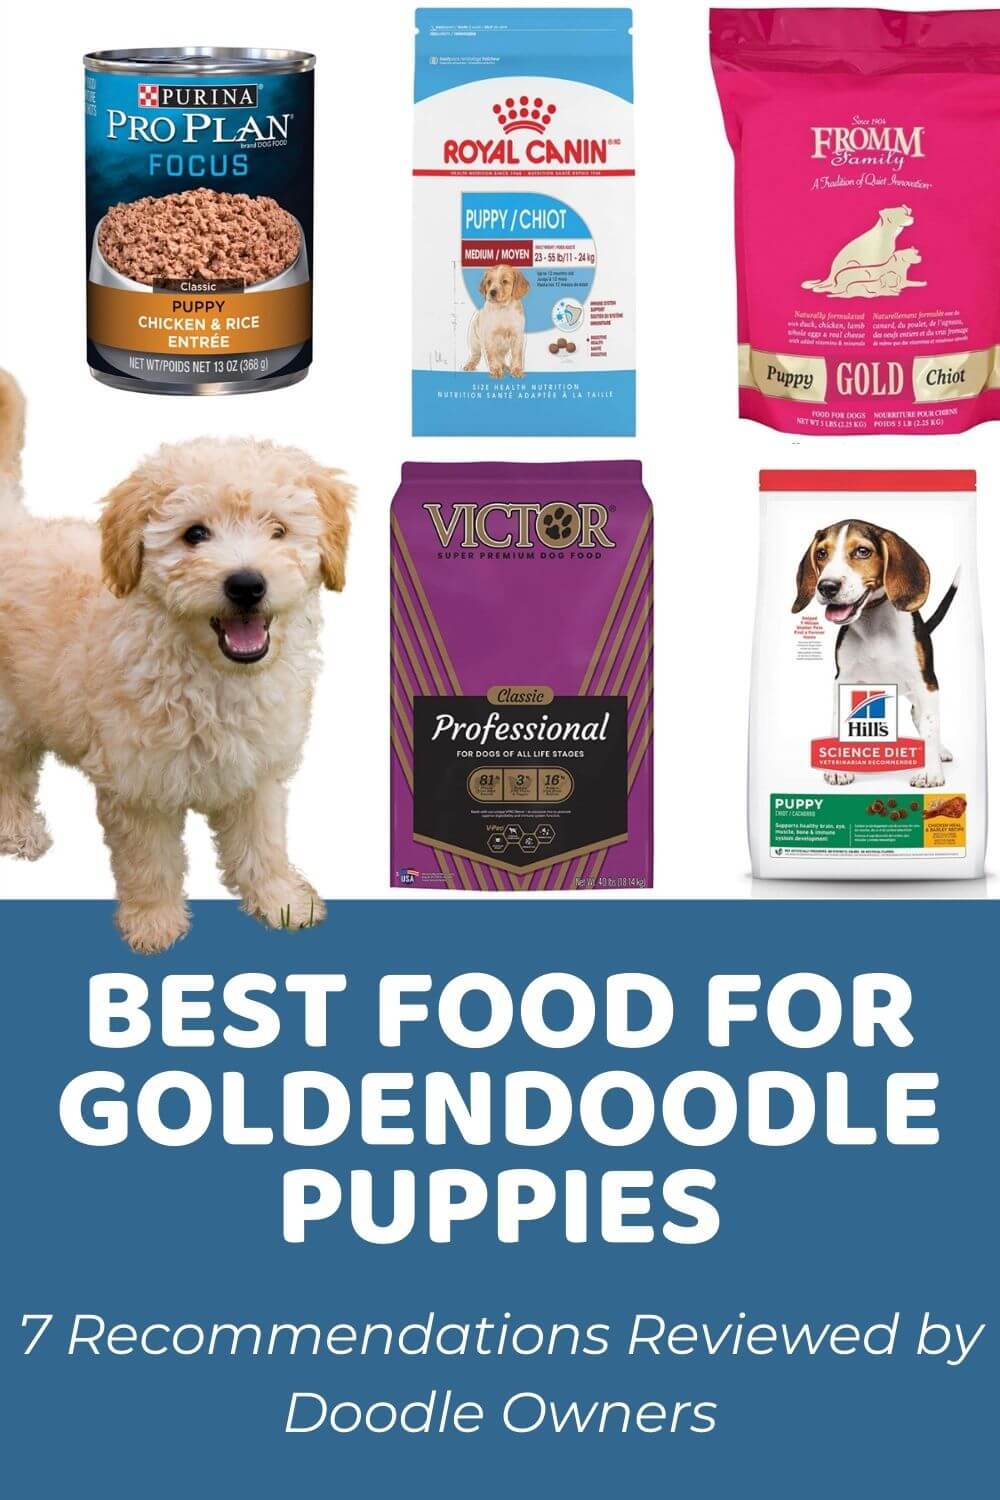 What Is the Best Dog Food for Goldendoodle Puppies?